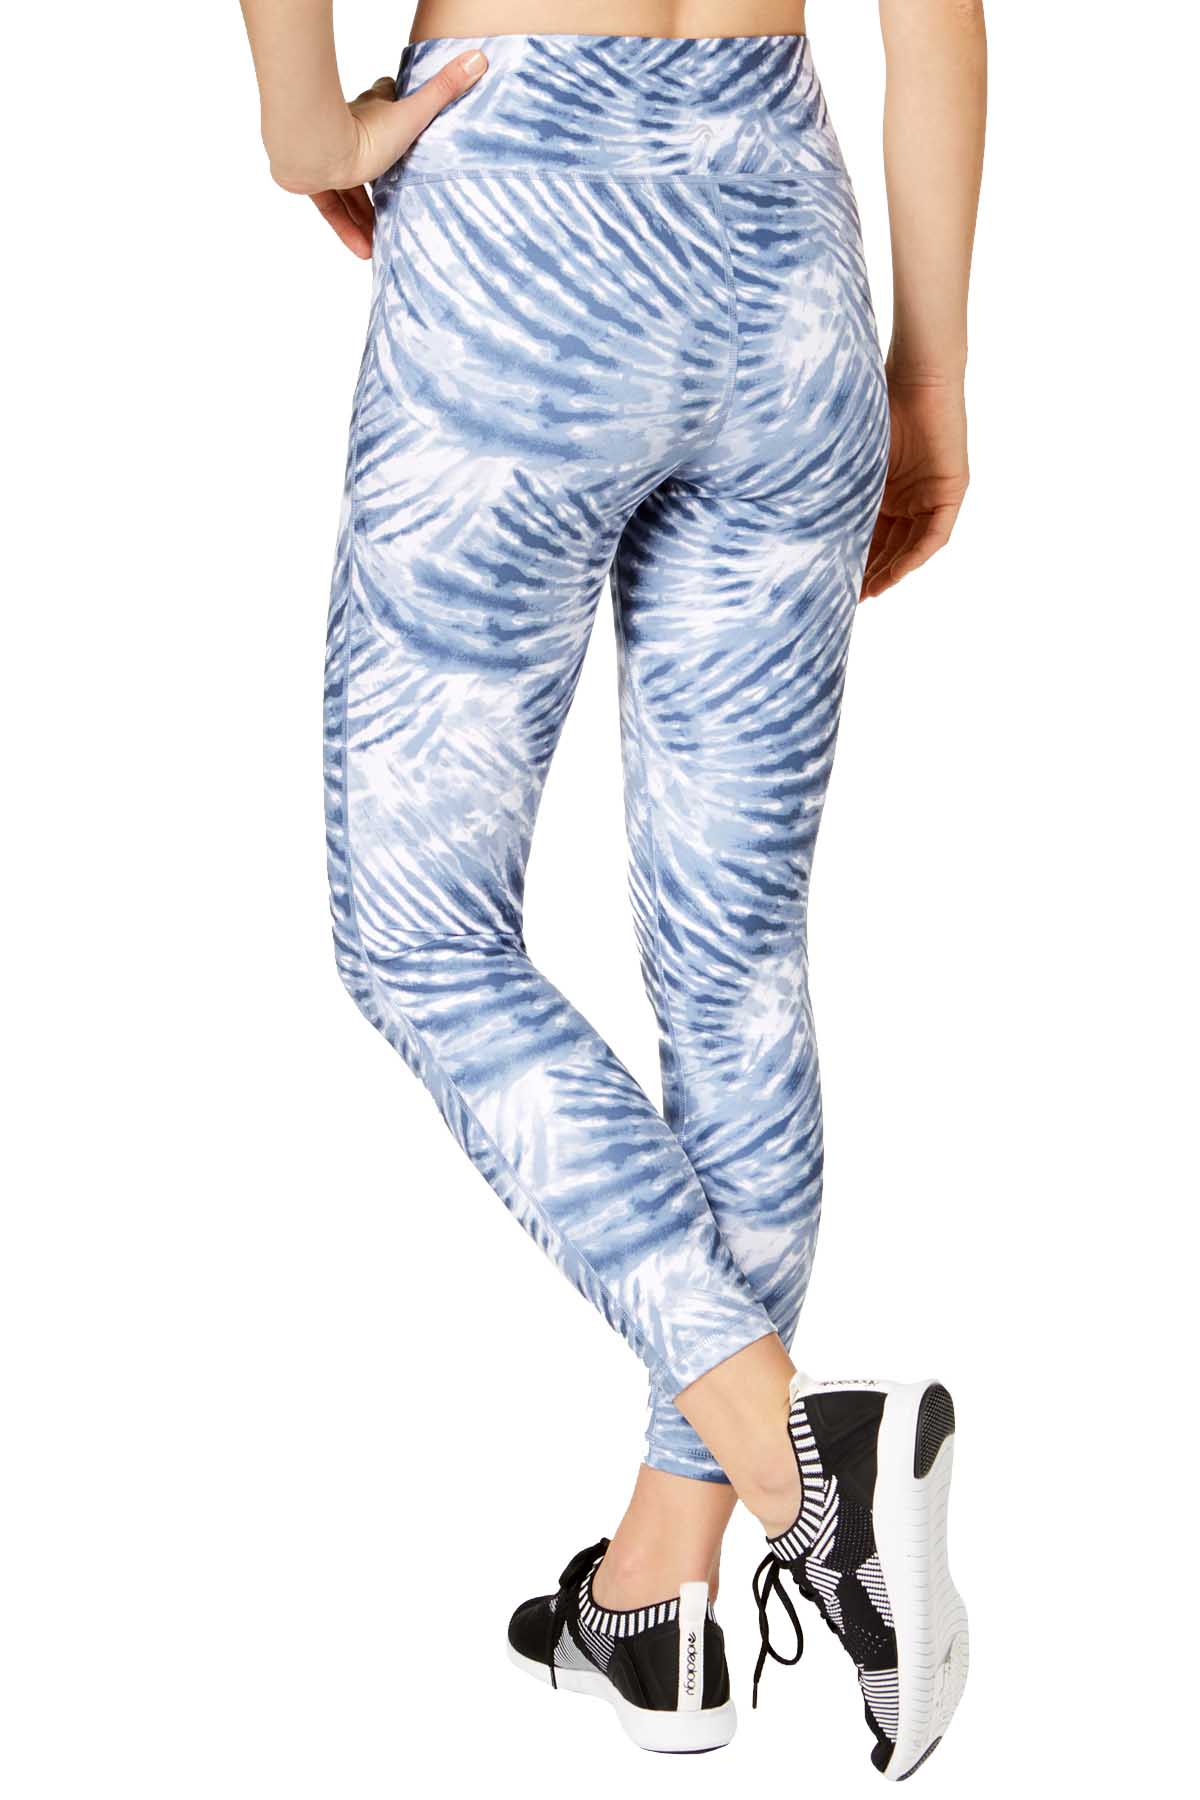 Ideology Navy Tie-Dyed 7/8 Ankle Legging